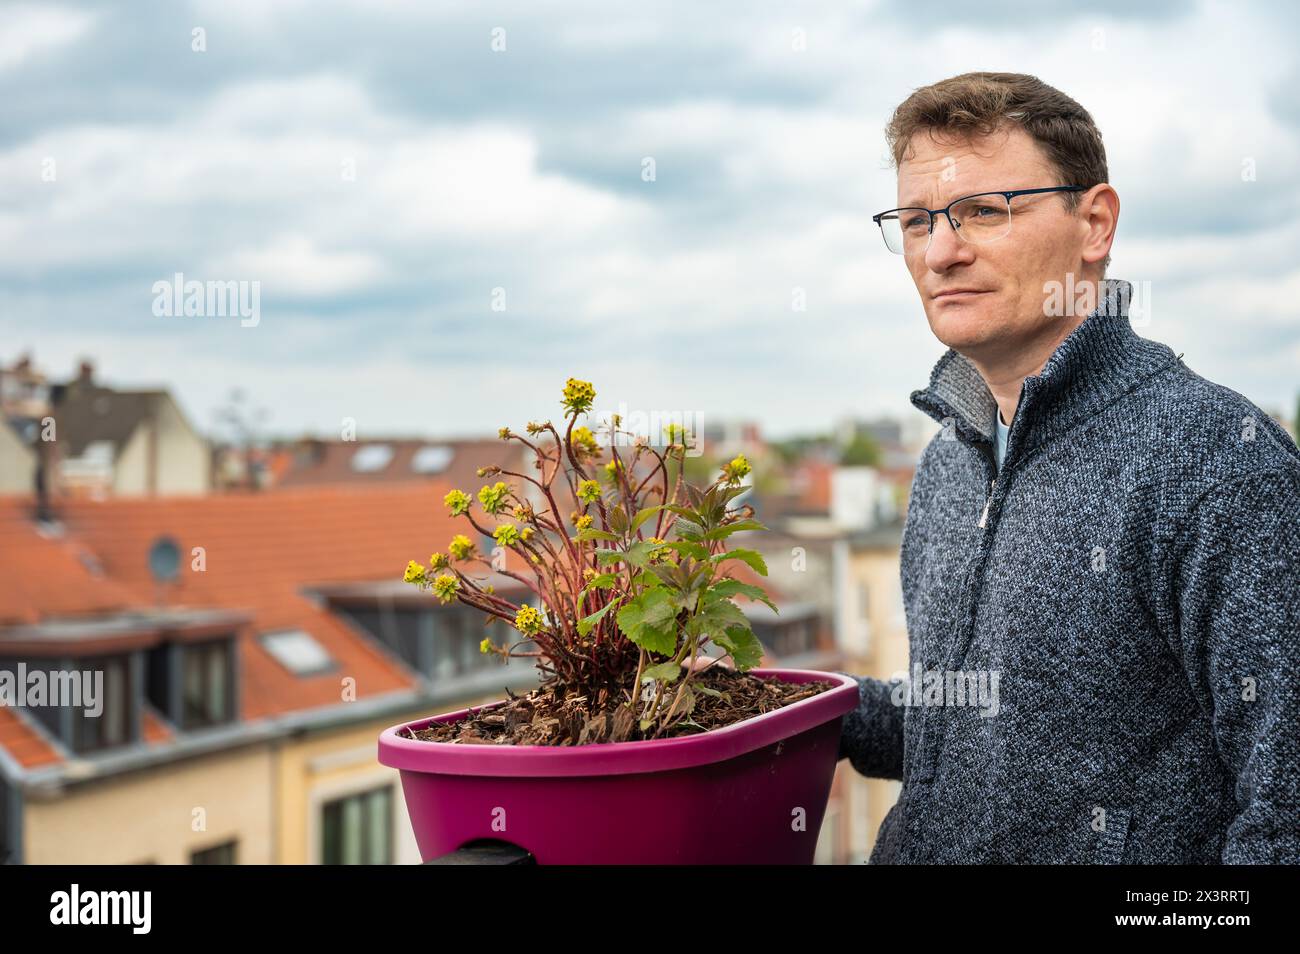 Portrait of a  45 yo business man outdoors, Brussels, Belgium. Model released. Stock Photo